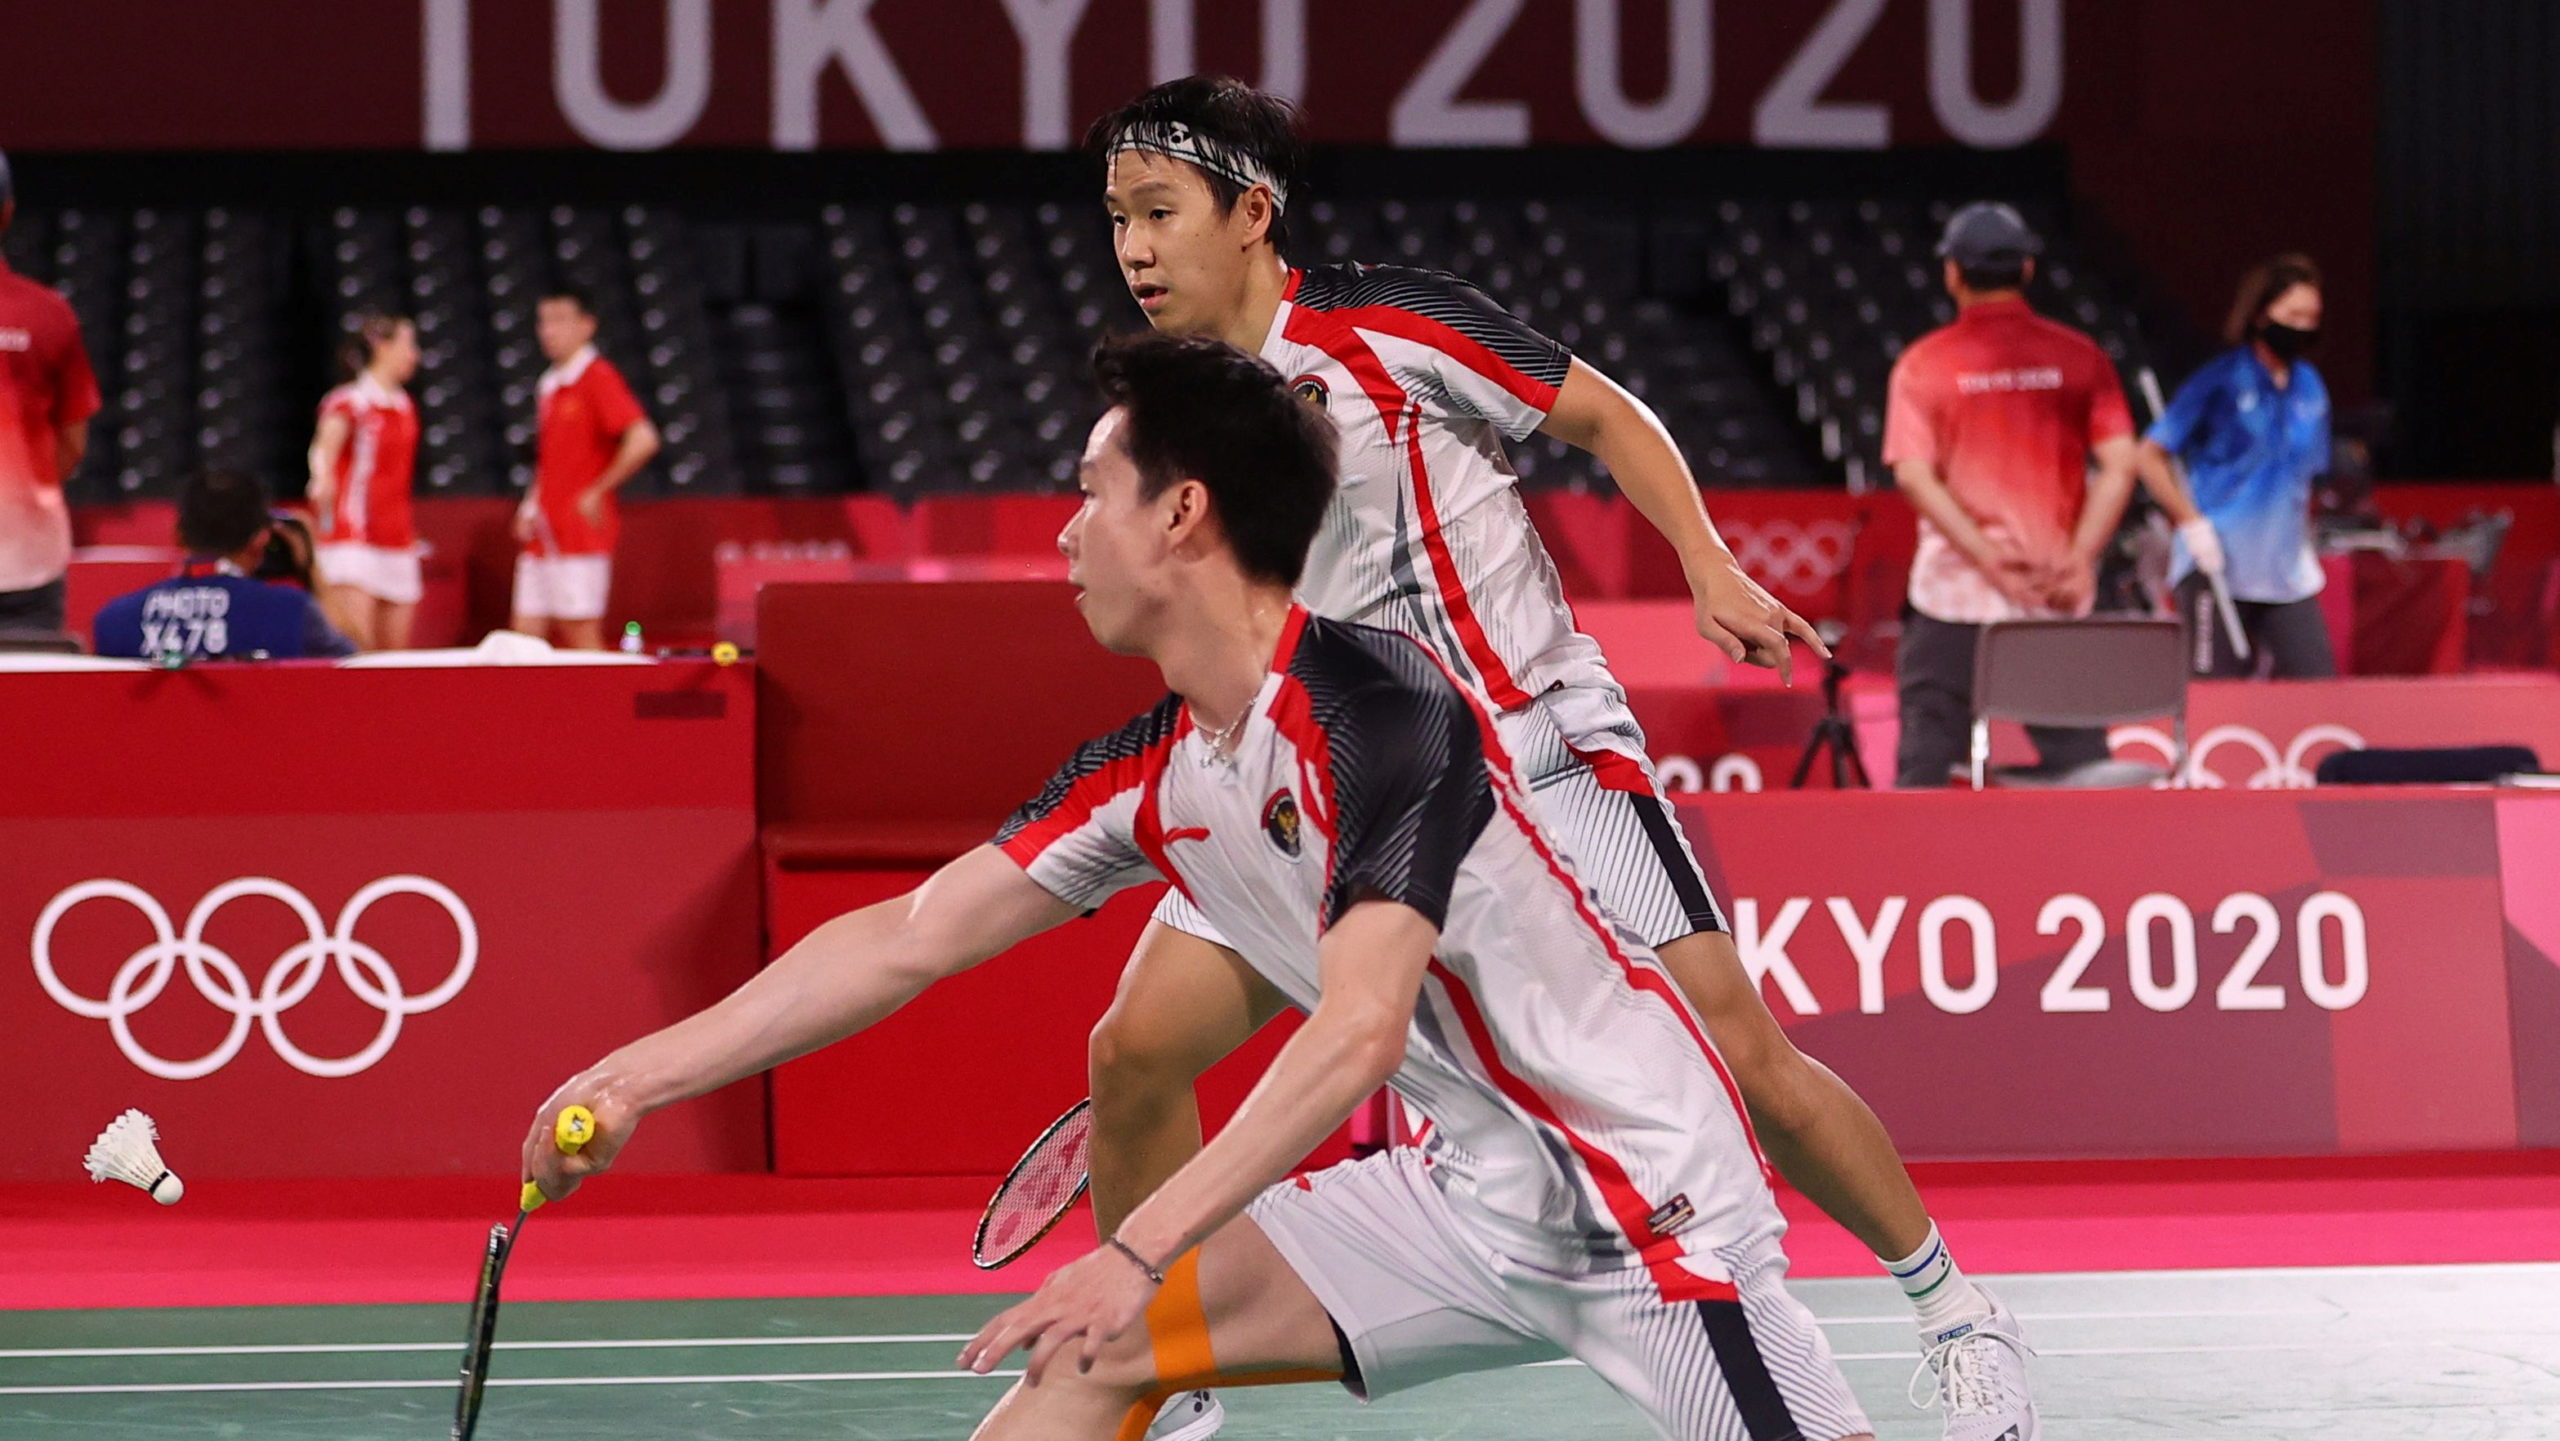 Kevin Sanjaya Sukamuljo of Indonesia in action as Marcus Fernaldi Gideon of Indonesia looks on during the match against Aaron Chia of Malaysia and Soh Wooi Yik of Malaysia.